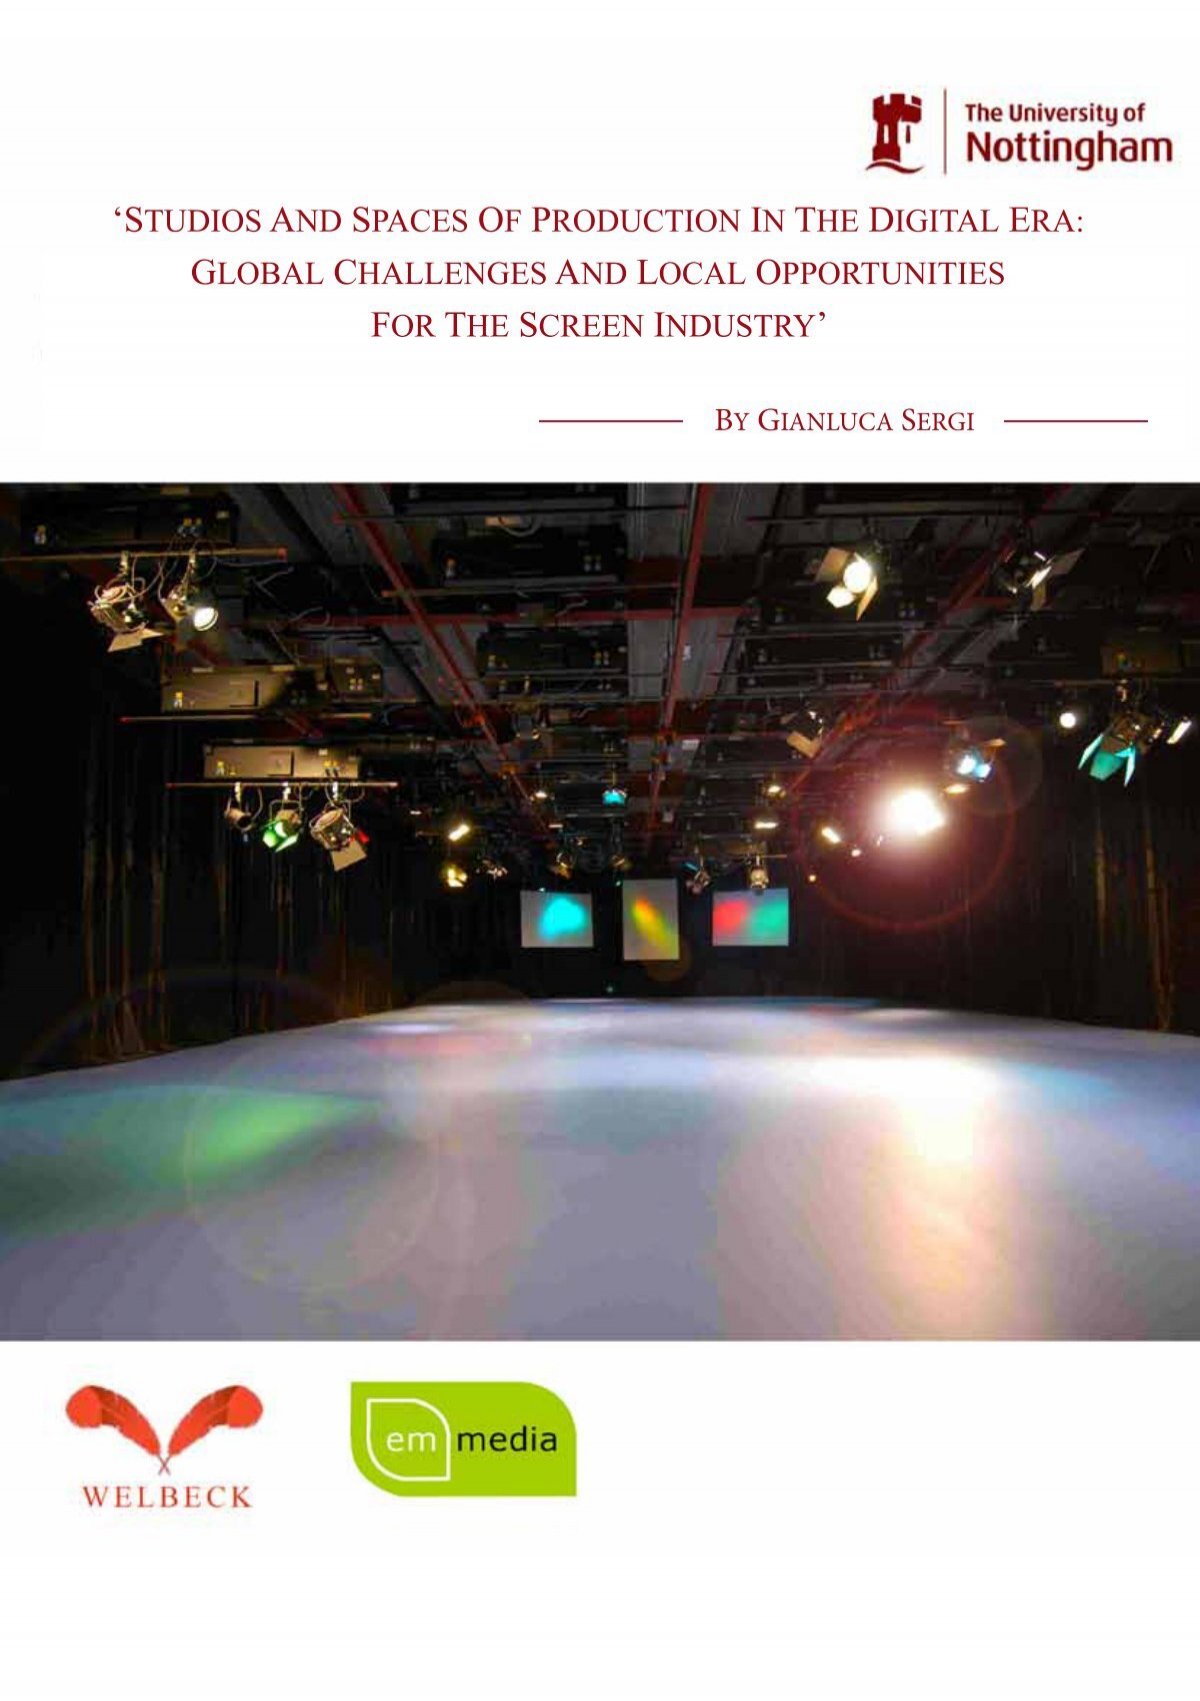 studios and spaces of production in the digital - University of